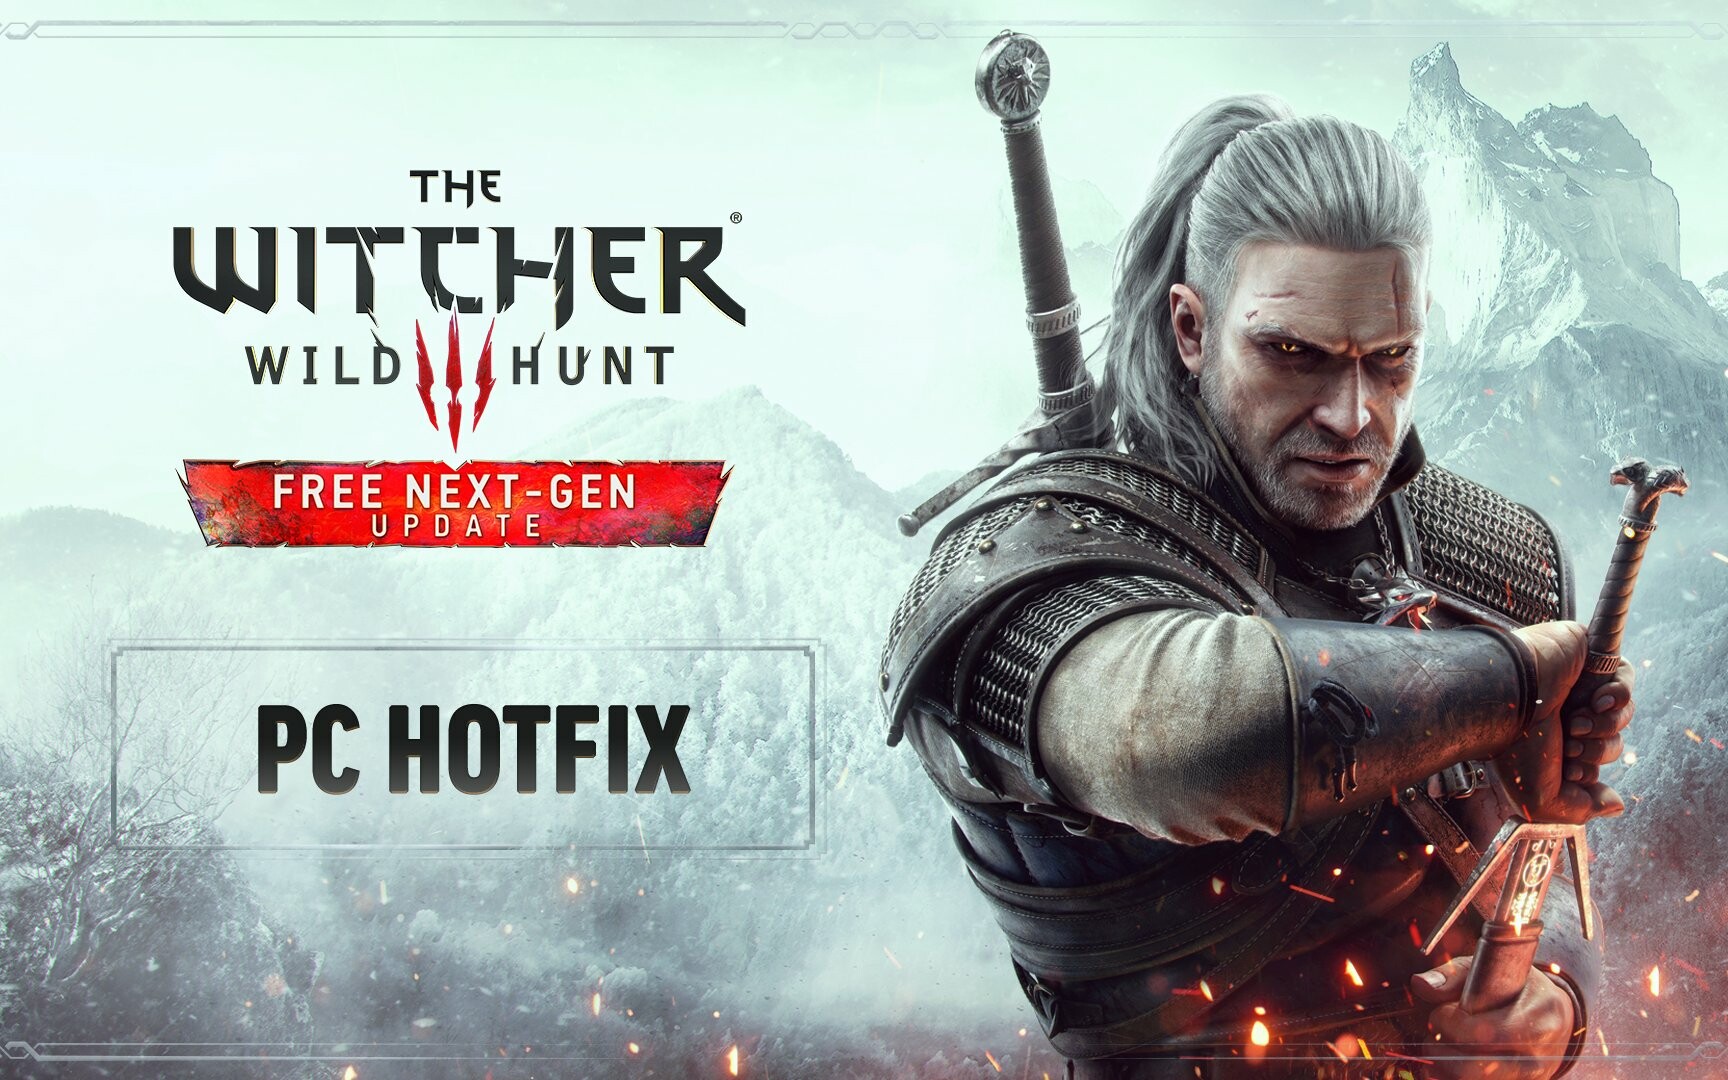 The Witcher 3 has been improved on PC.  CD Projekt RED has published a patch for its next generation update